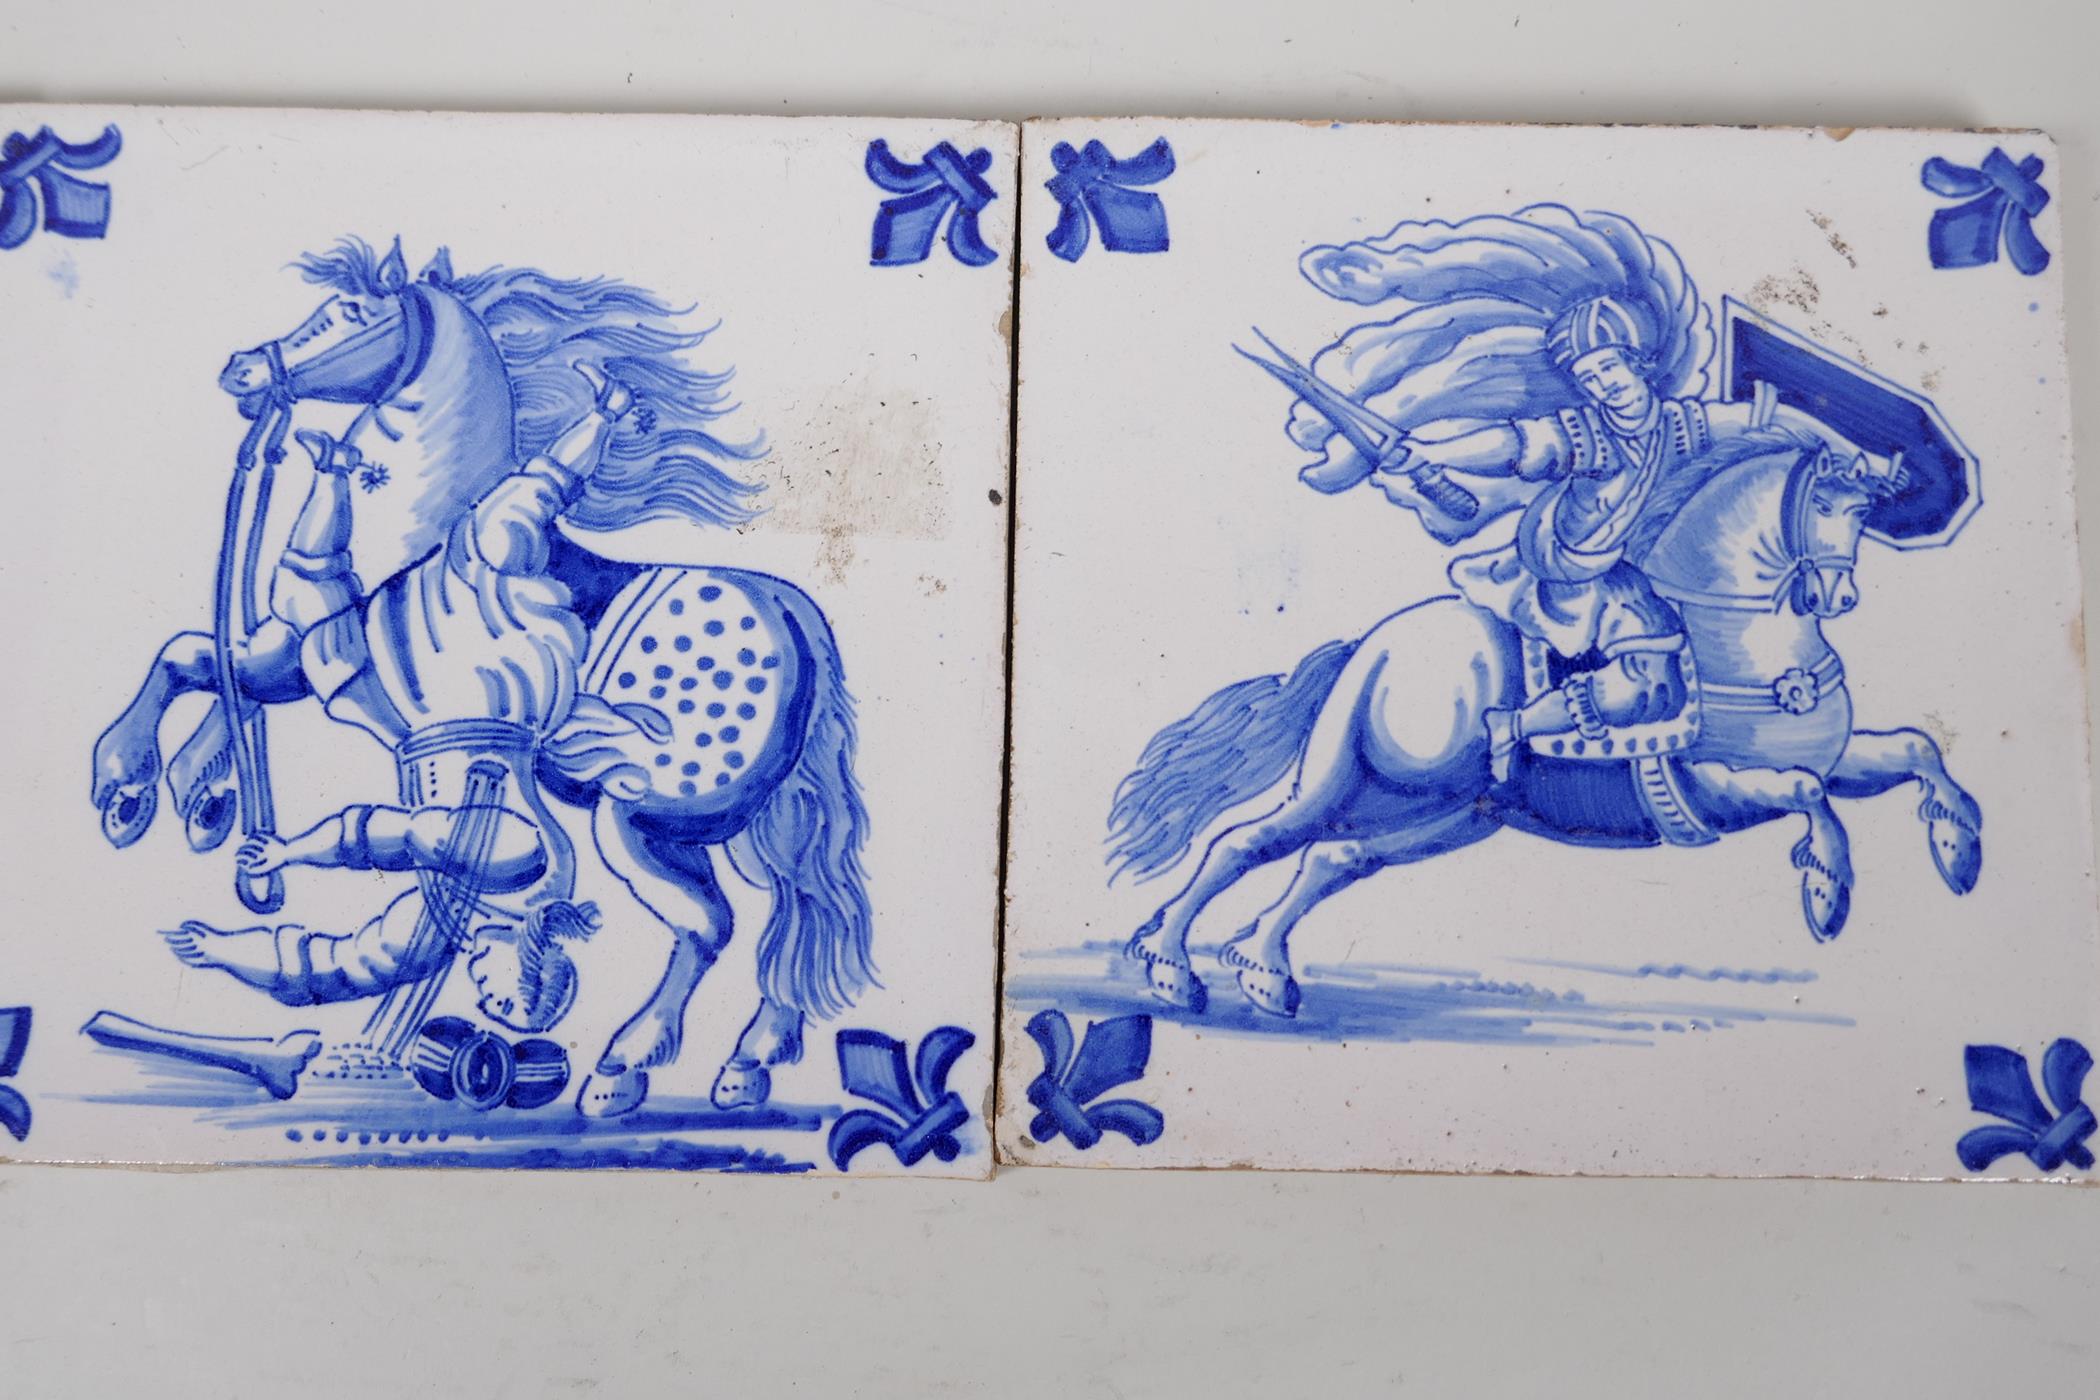 A set of three blue and white Delft style tiles depicting Ottoman warriors on horseback, 6" square - Image 3 of 3